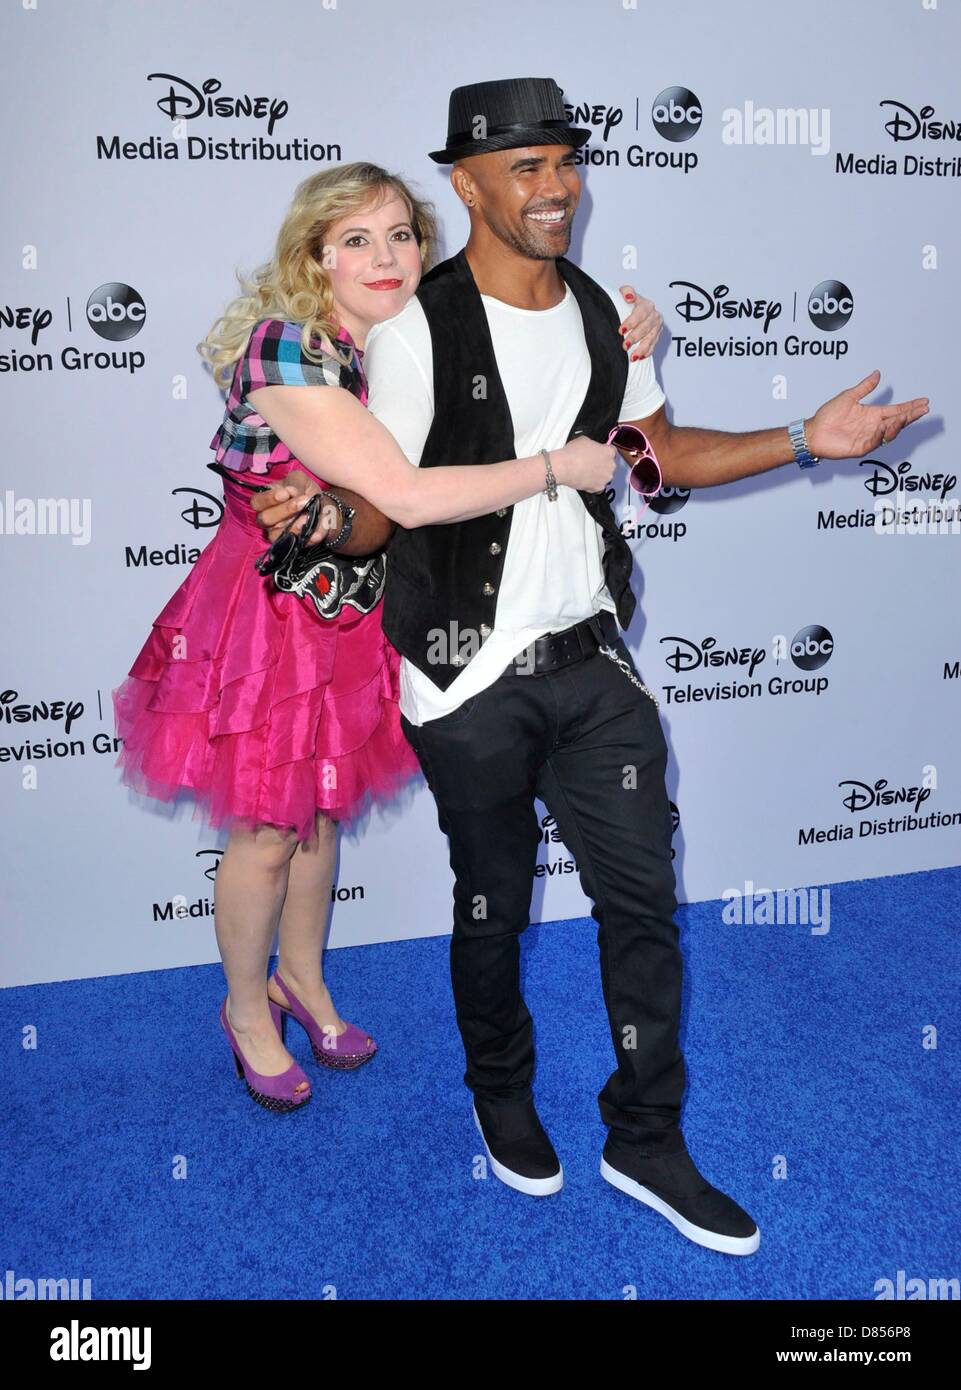 Actors KIRSTEN VANGSNESS and SHEMAR MOORE on the red carpet during the 2011...